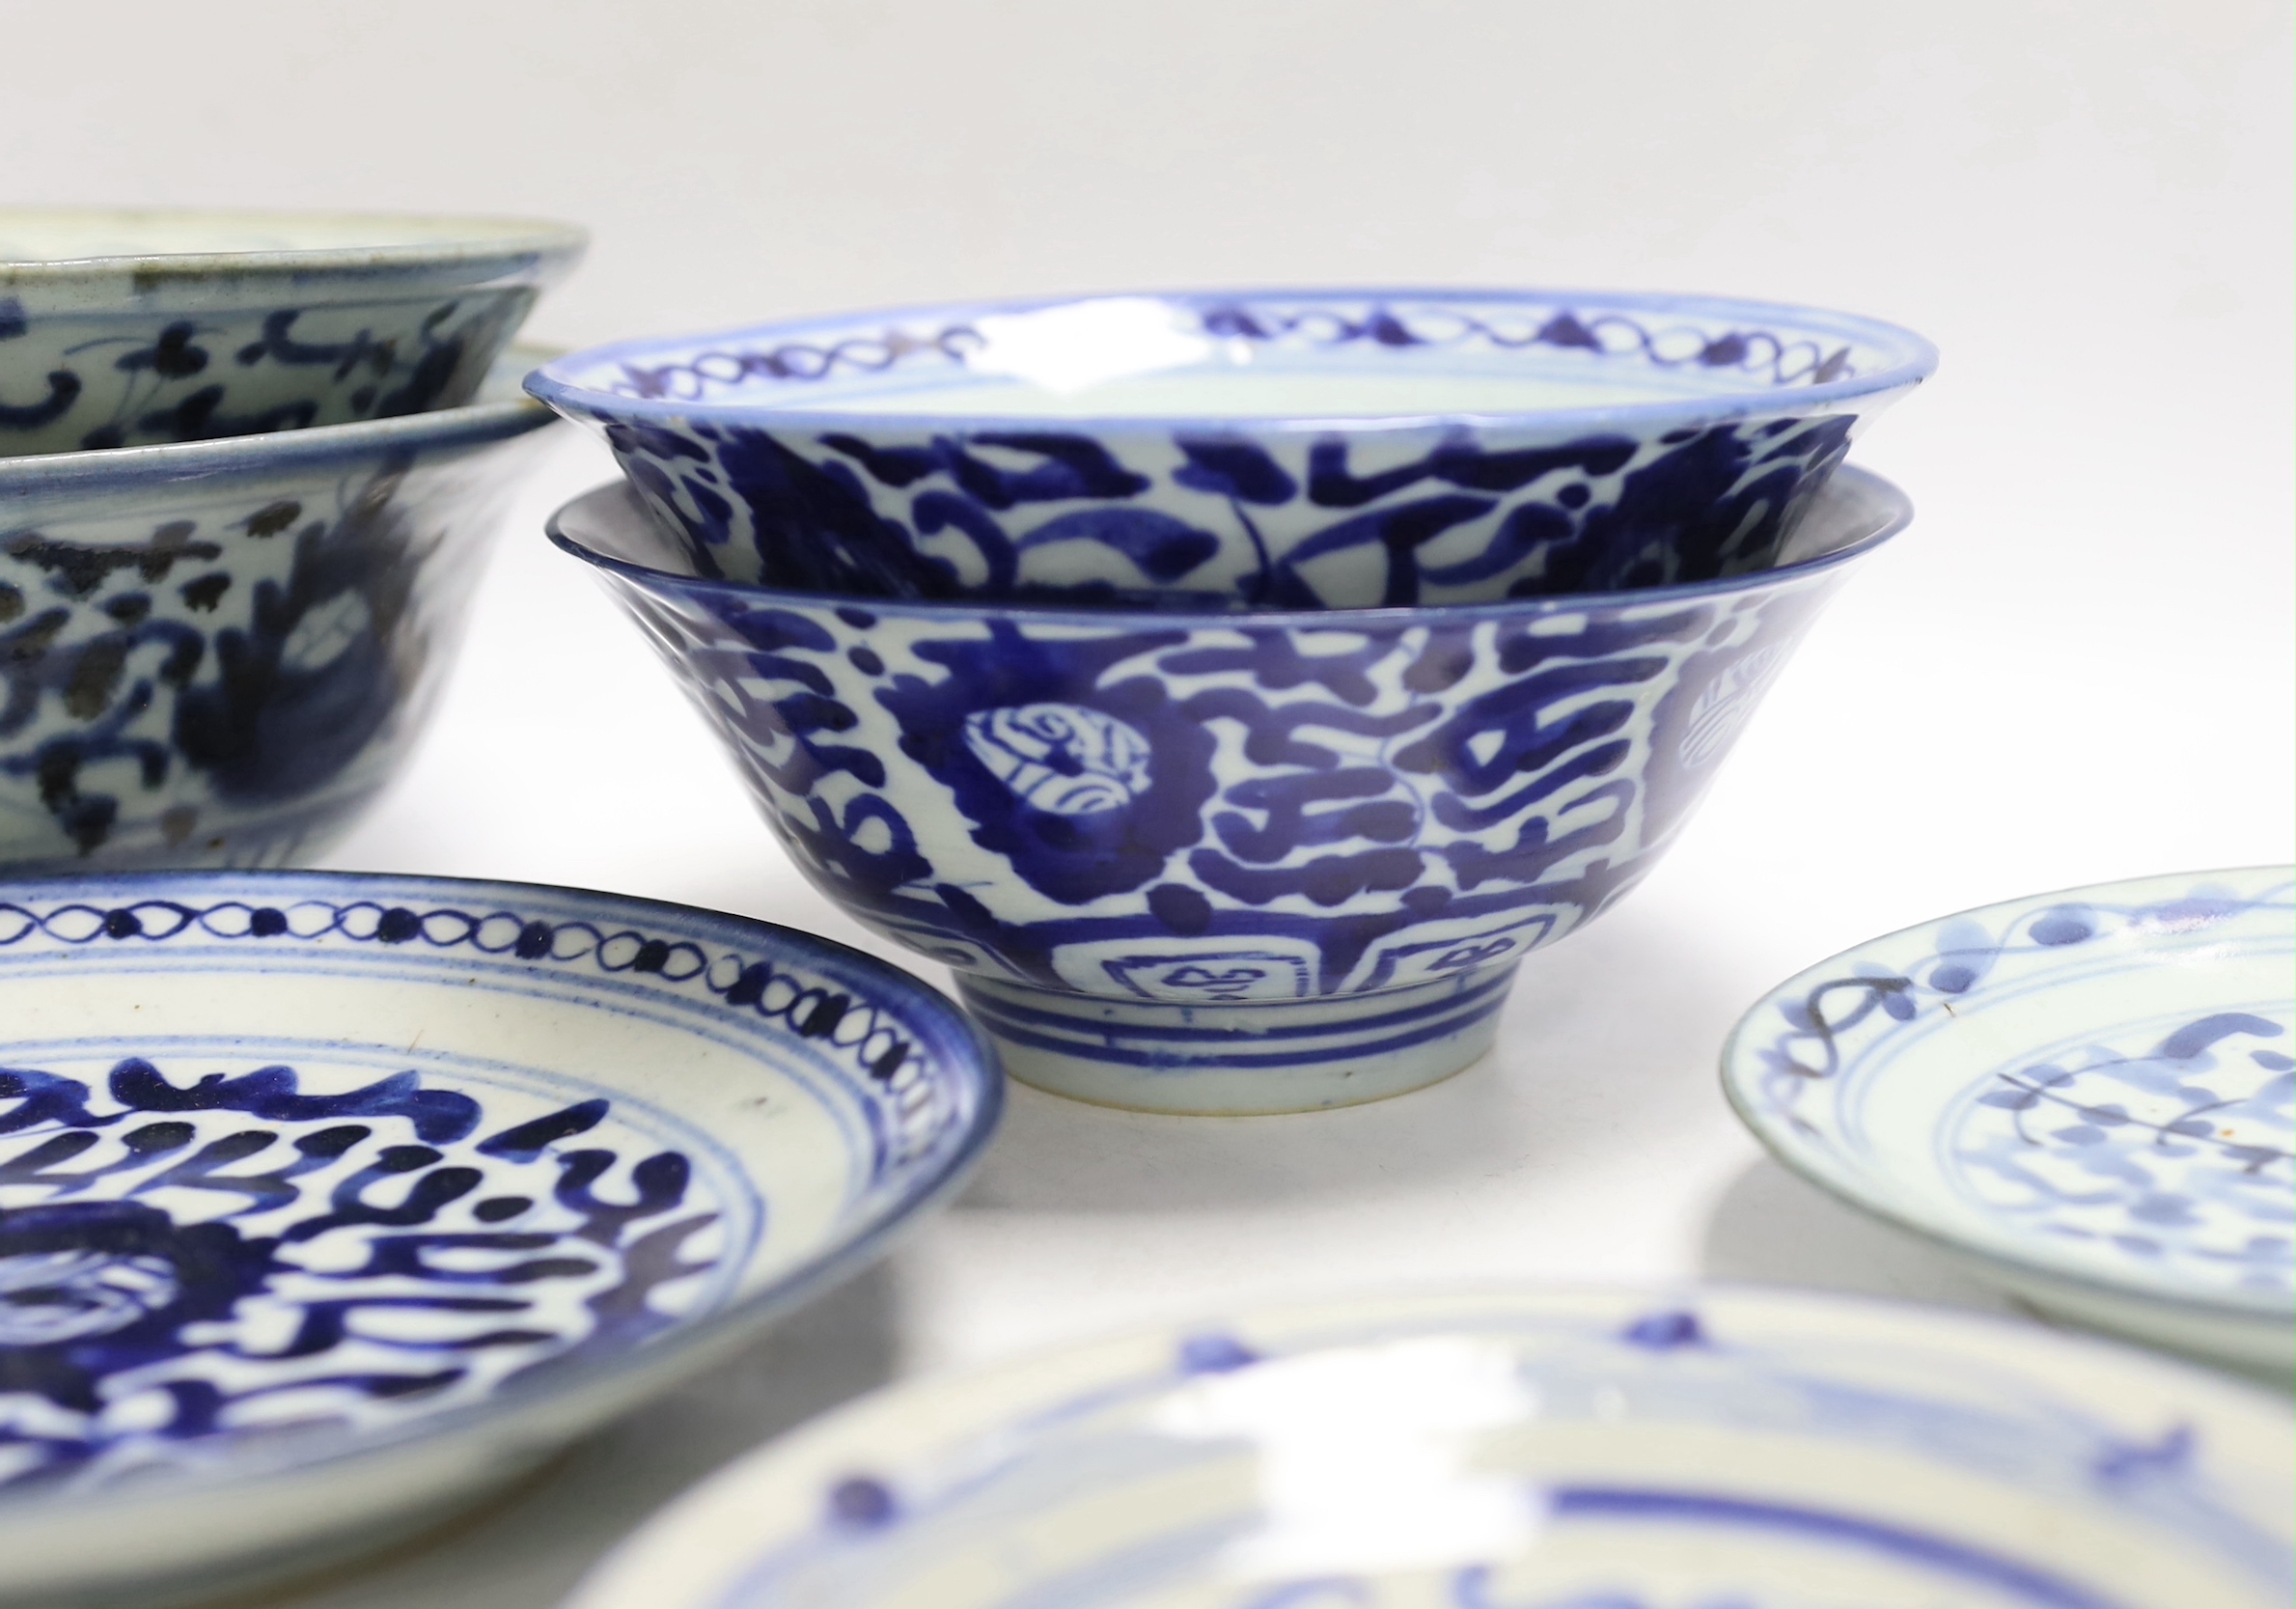 Thirteen Chinese blue and white dishes, plates and bowls, largest diameter 17.5cm